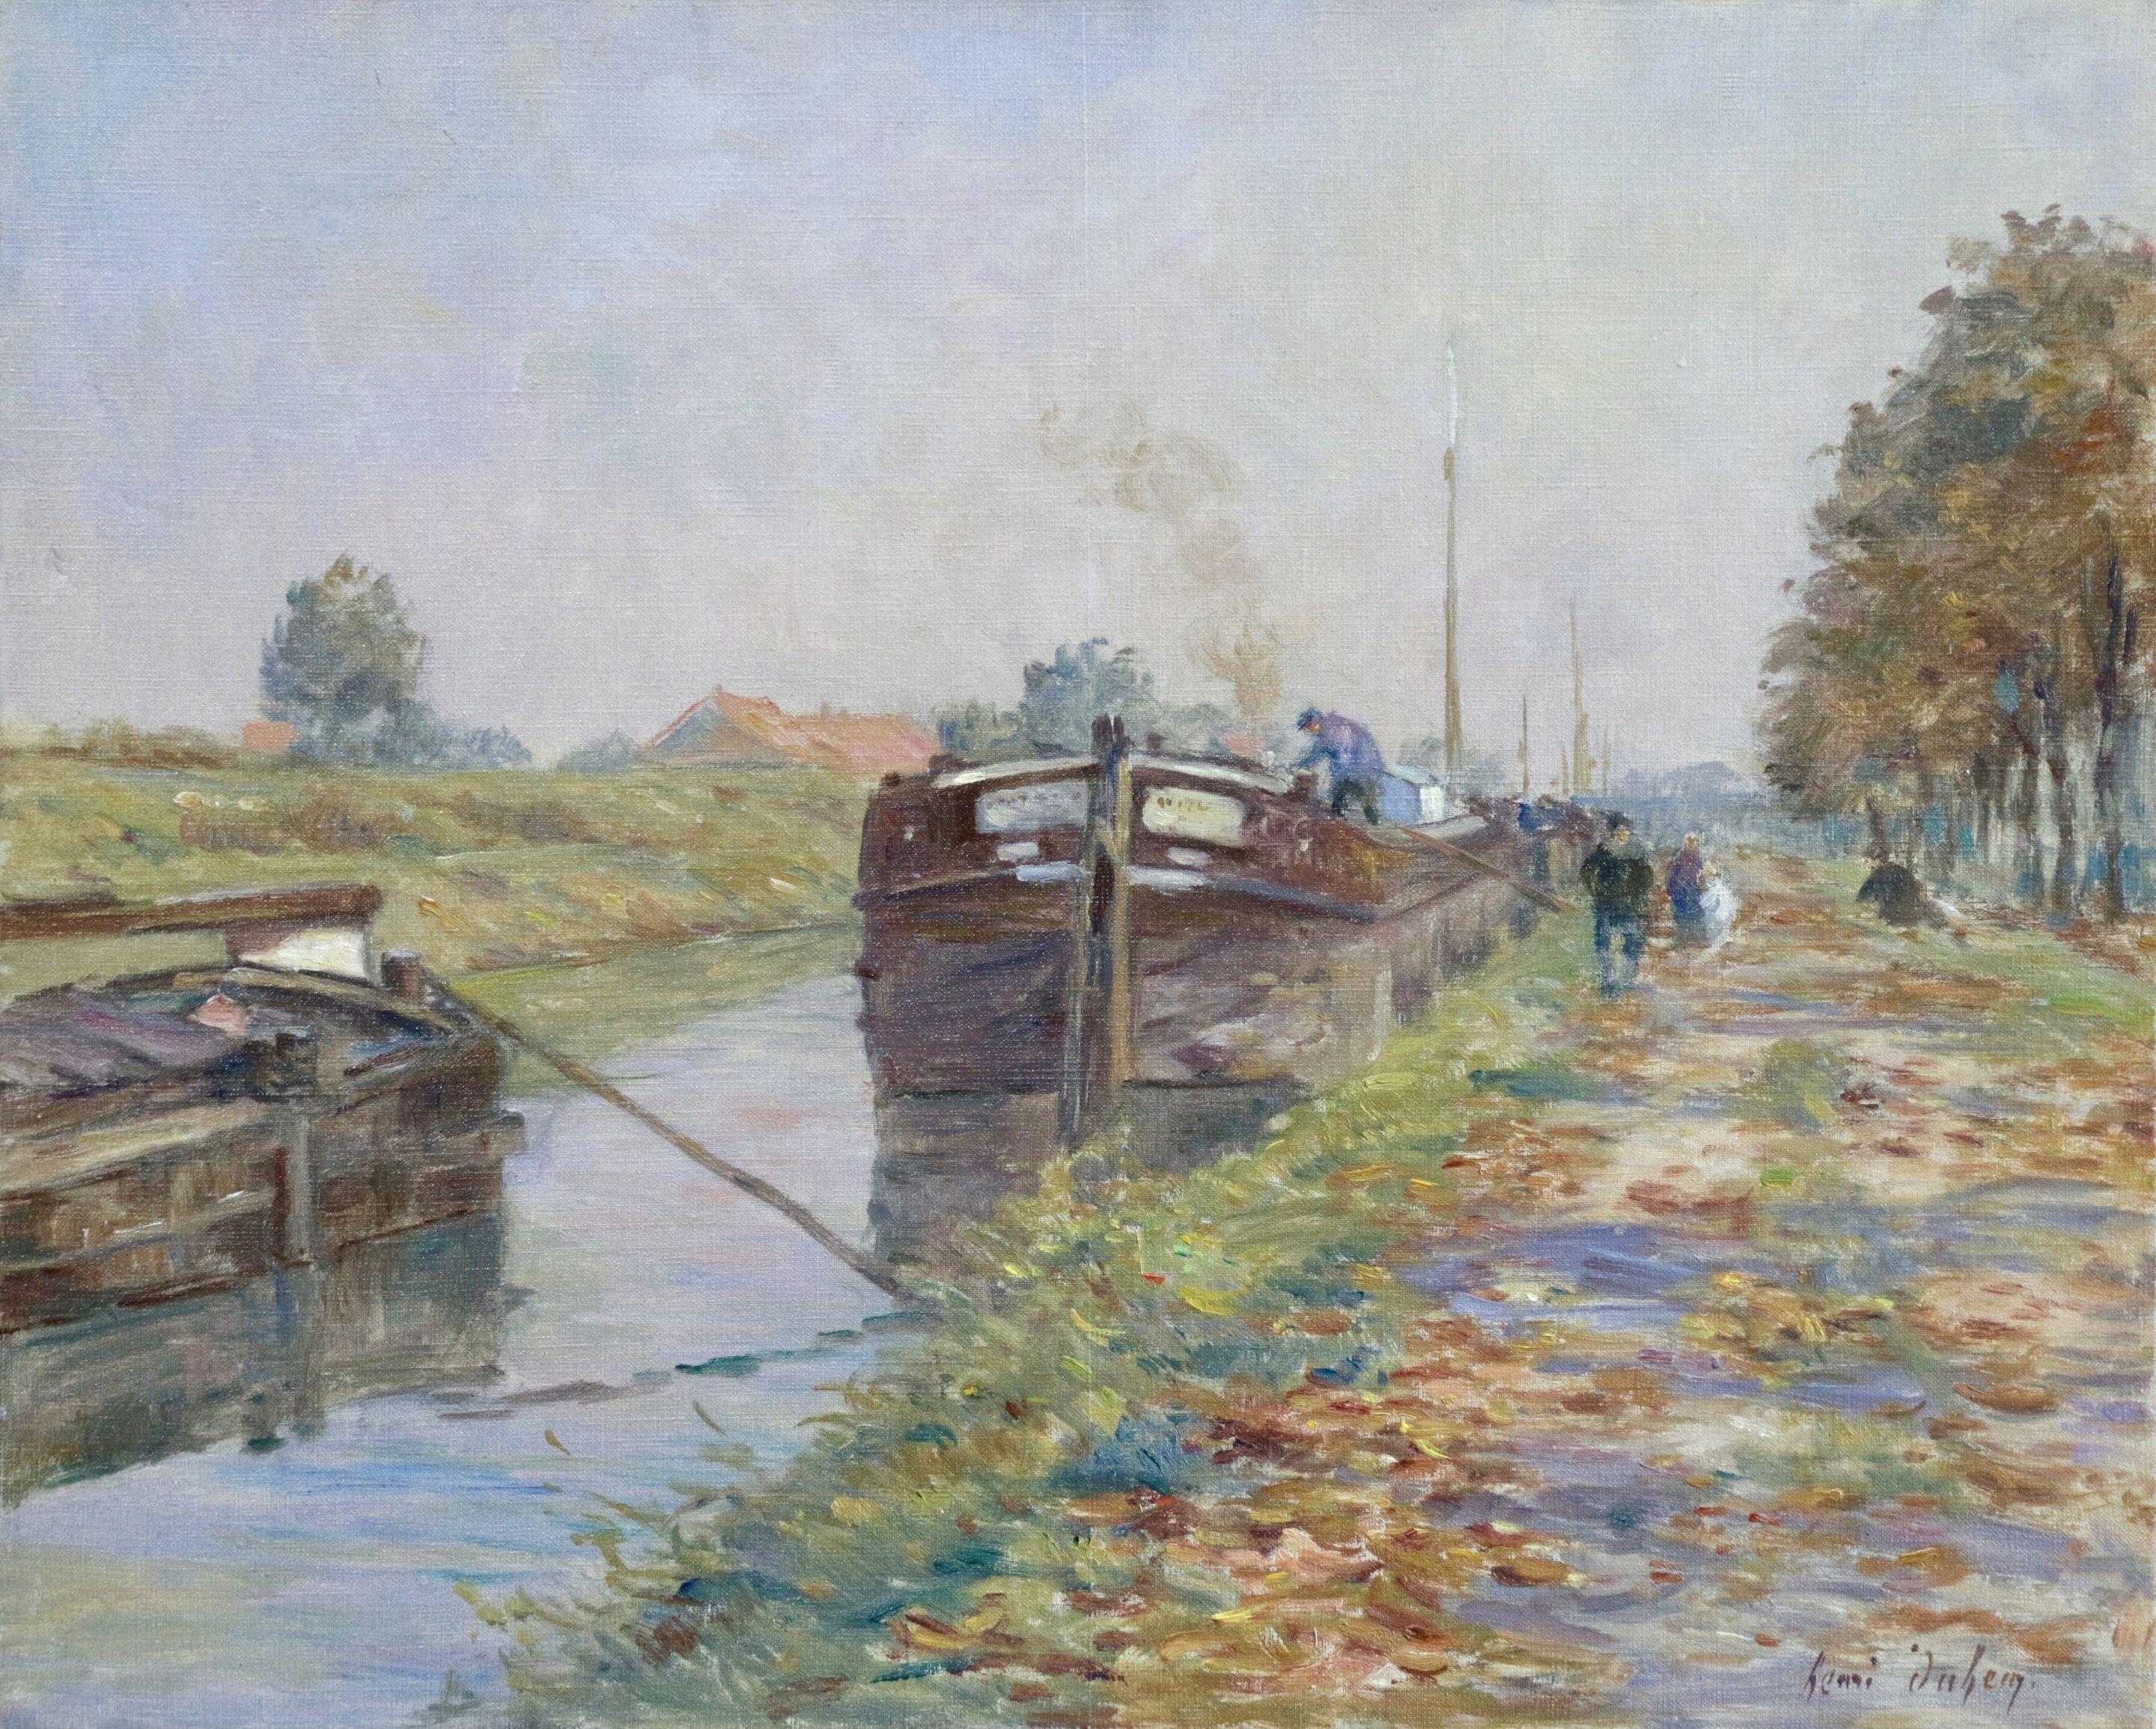 The Canal at Douai - 19th Century Landscape Riverscape with Boats by Henri Duhem